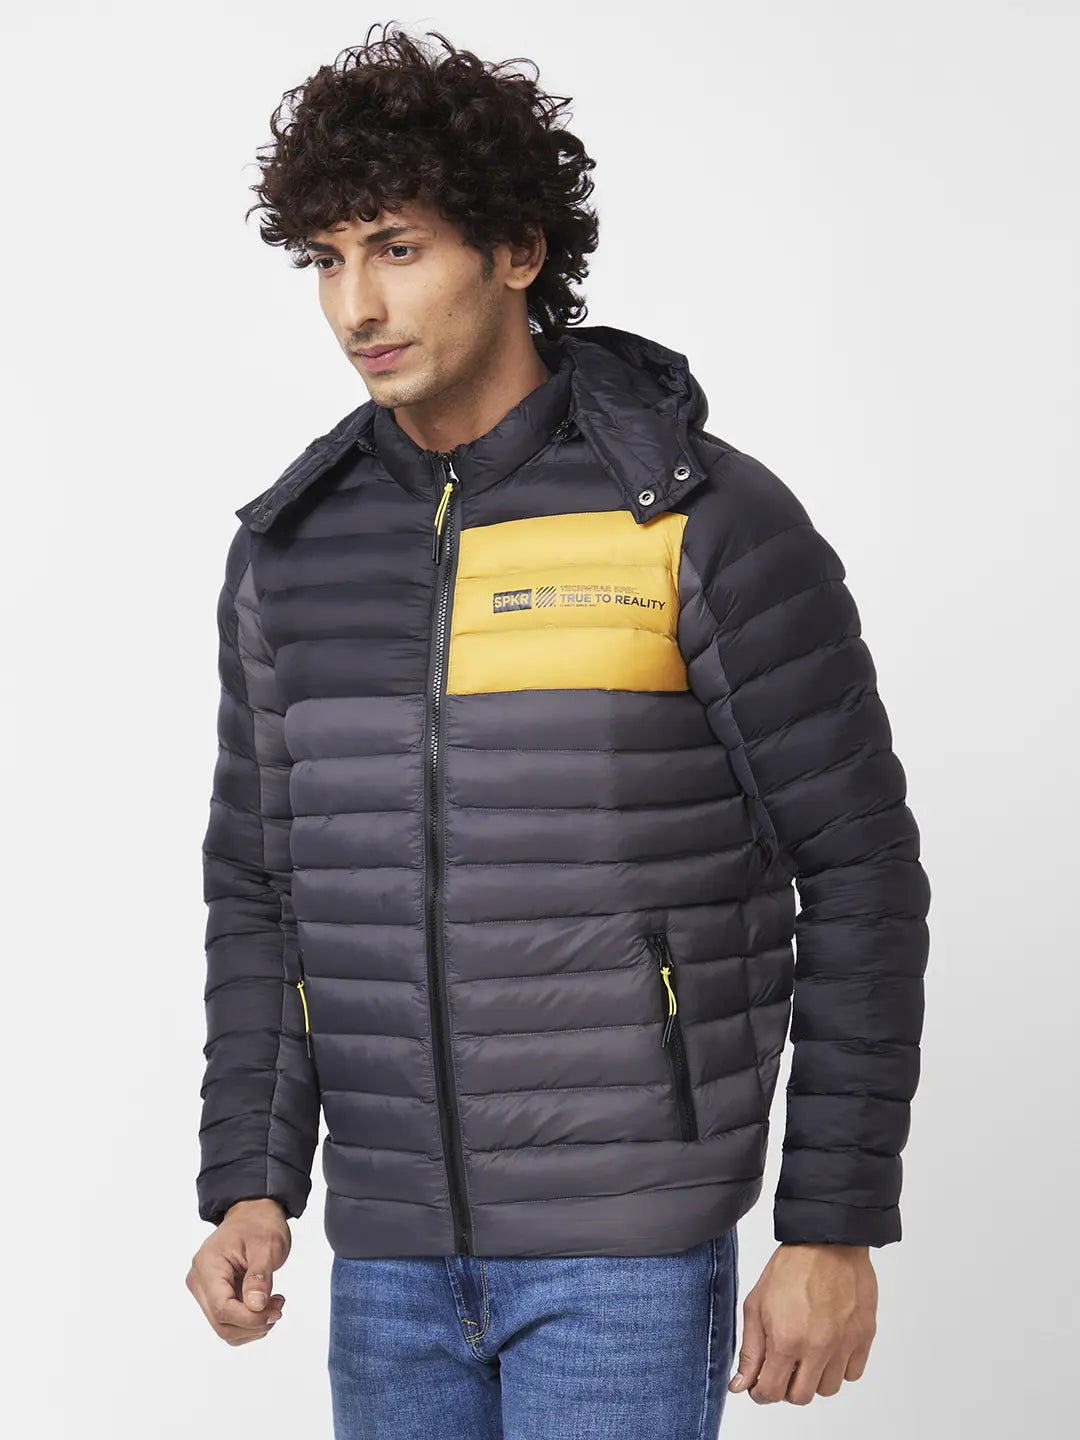 MEN'S COLOR BLOCKED PUFFER JACKET WITH EMBROIDERED SLEEVE BADGE